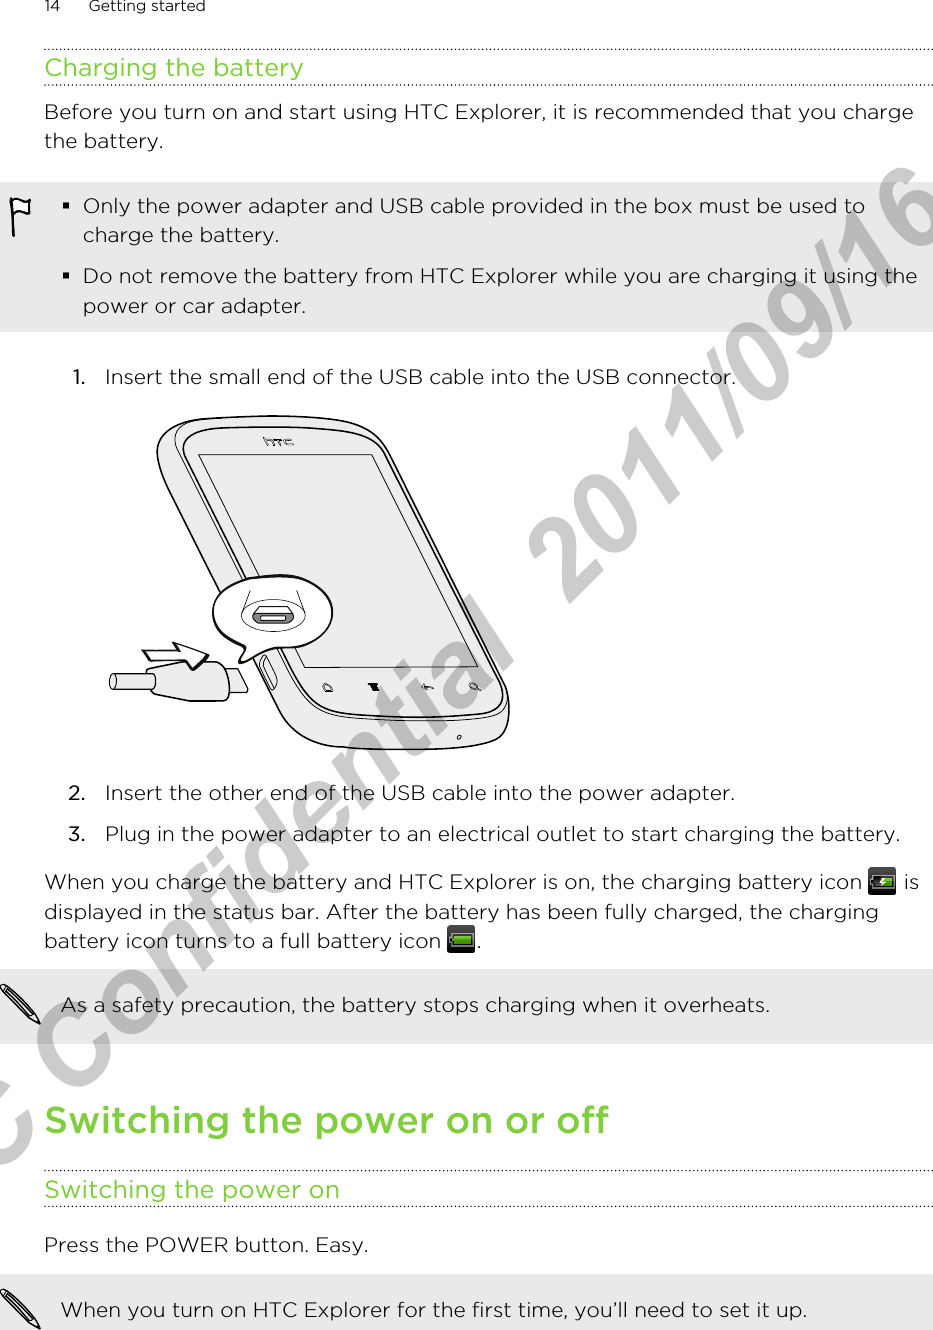 Charging the batteryBefore you turn on and start using HTC Explorer, it is recommended that you chargethe battery.§Only the power adapter and USB cable provided in the box must be used tocharge the battery.§Do not remove the battery from HTC Explorer while you are charging it using thepower or car adapter.1. Insert the small end of the USB cable into the USB connector. 2. Insert the other end of the USB cable into the power adapter.3. Plug in the power adapter to an electrical outlet to start charging the battery.When you charge the battery and HTC Explorer is on, the charging battery icon   isdisplayed in the status bar. After the battery has been fully charged, the chargingbattery icon turns to a full battery icon  .As a safety precaution, the battery stops charging when it overheats.Switching the power on or offSwitching the power onPress the POWER button. Easy. When you turn on HTC Explorer for the first time, you’ll need to set it up.14 Getting startedHTC Confidential  2011/09/16 